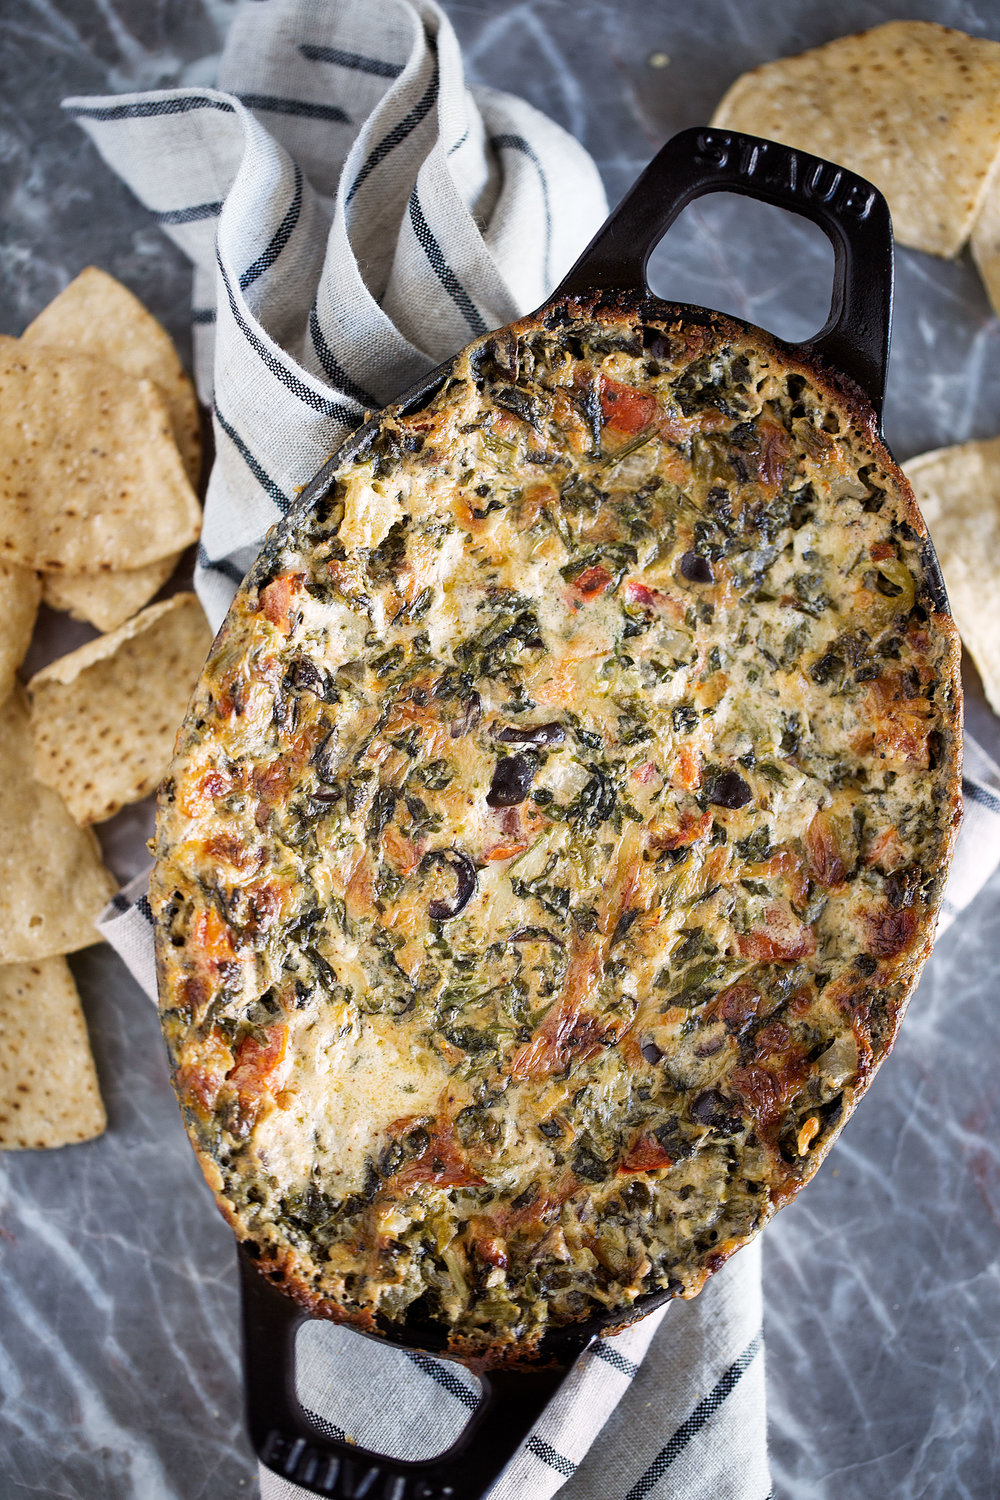 This cheesy hot spinach dip recipe is filled with tomatoes, green chilies and tomatoes combines Mexican flavors for a crowd-pleasing appetizer